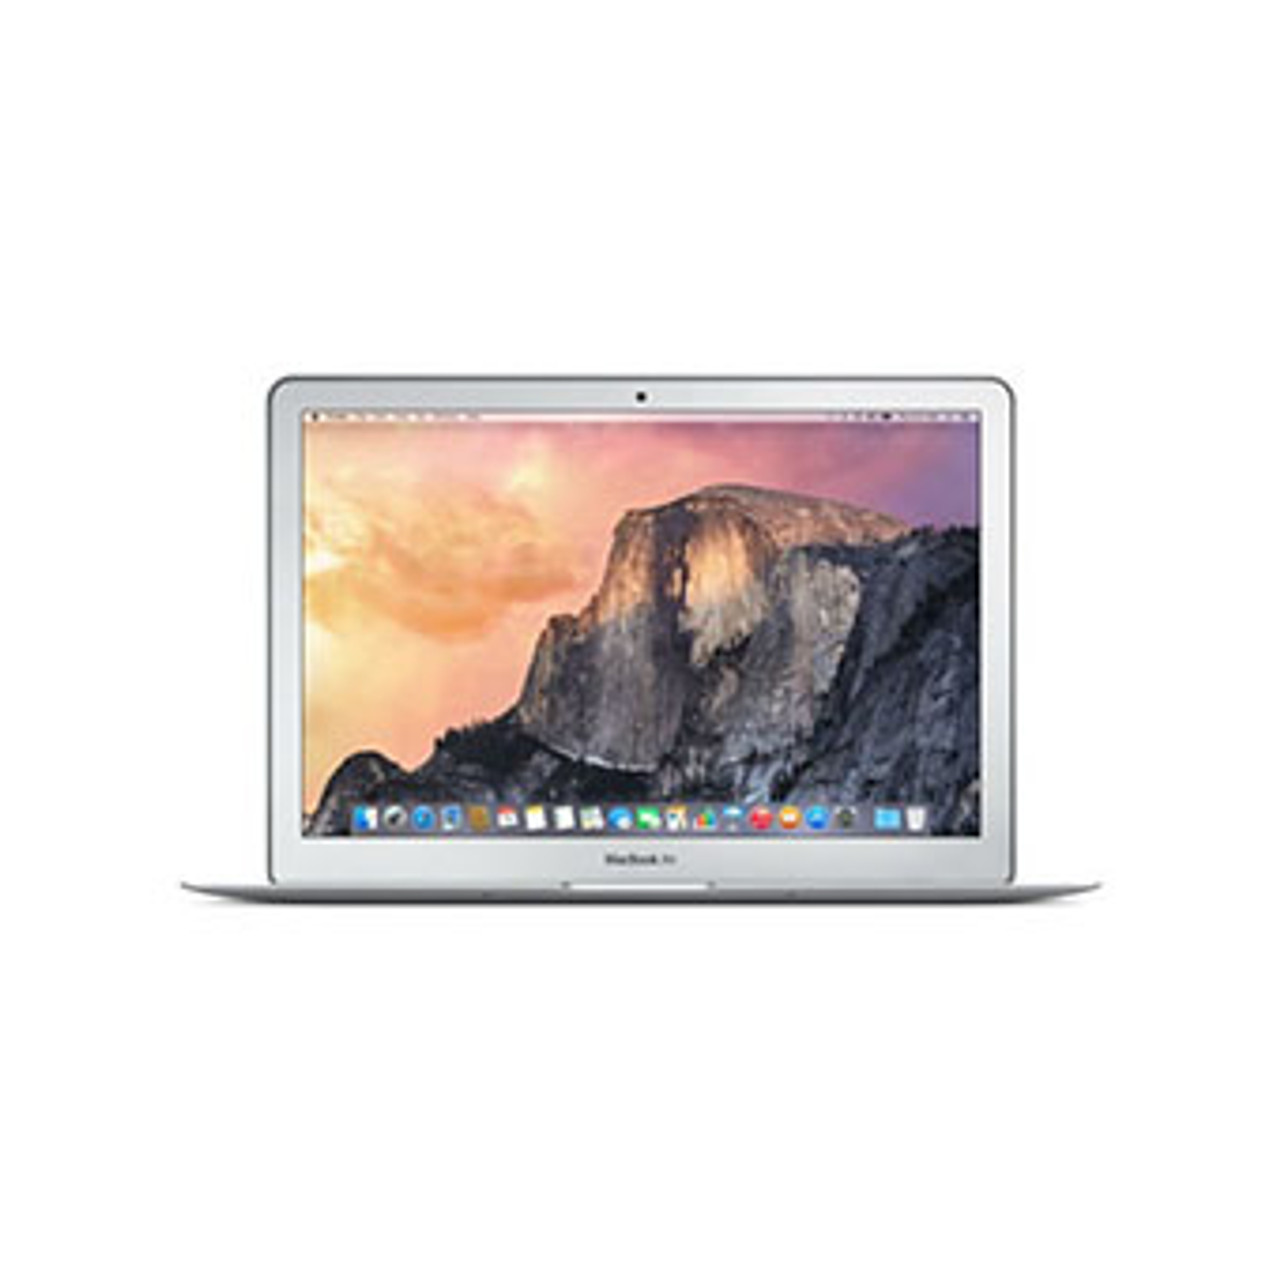 Apple MacBook Air 13-inch 2.2GHz Core i7 (Early 2015)